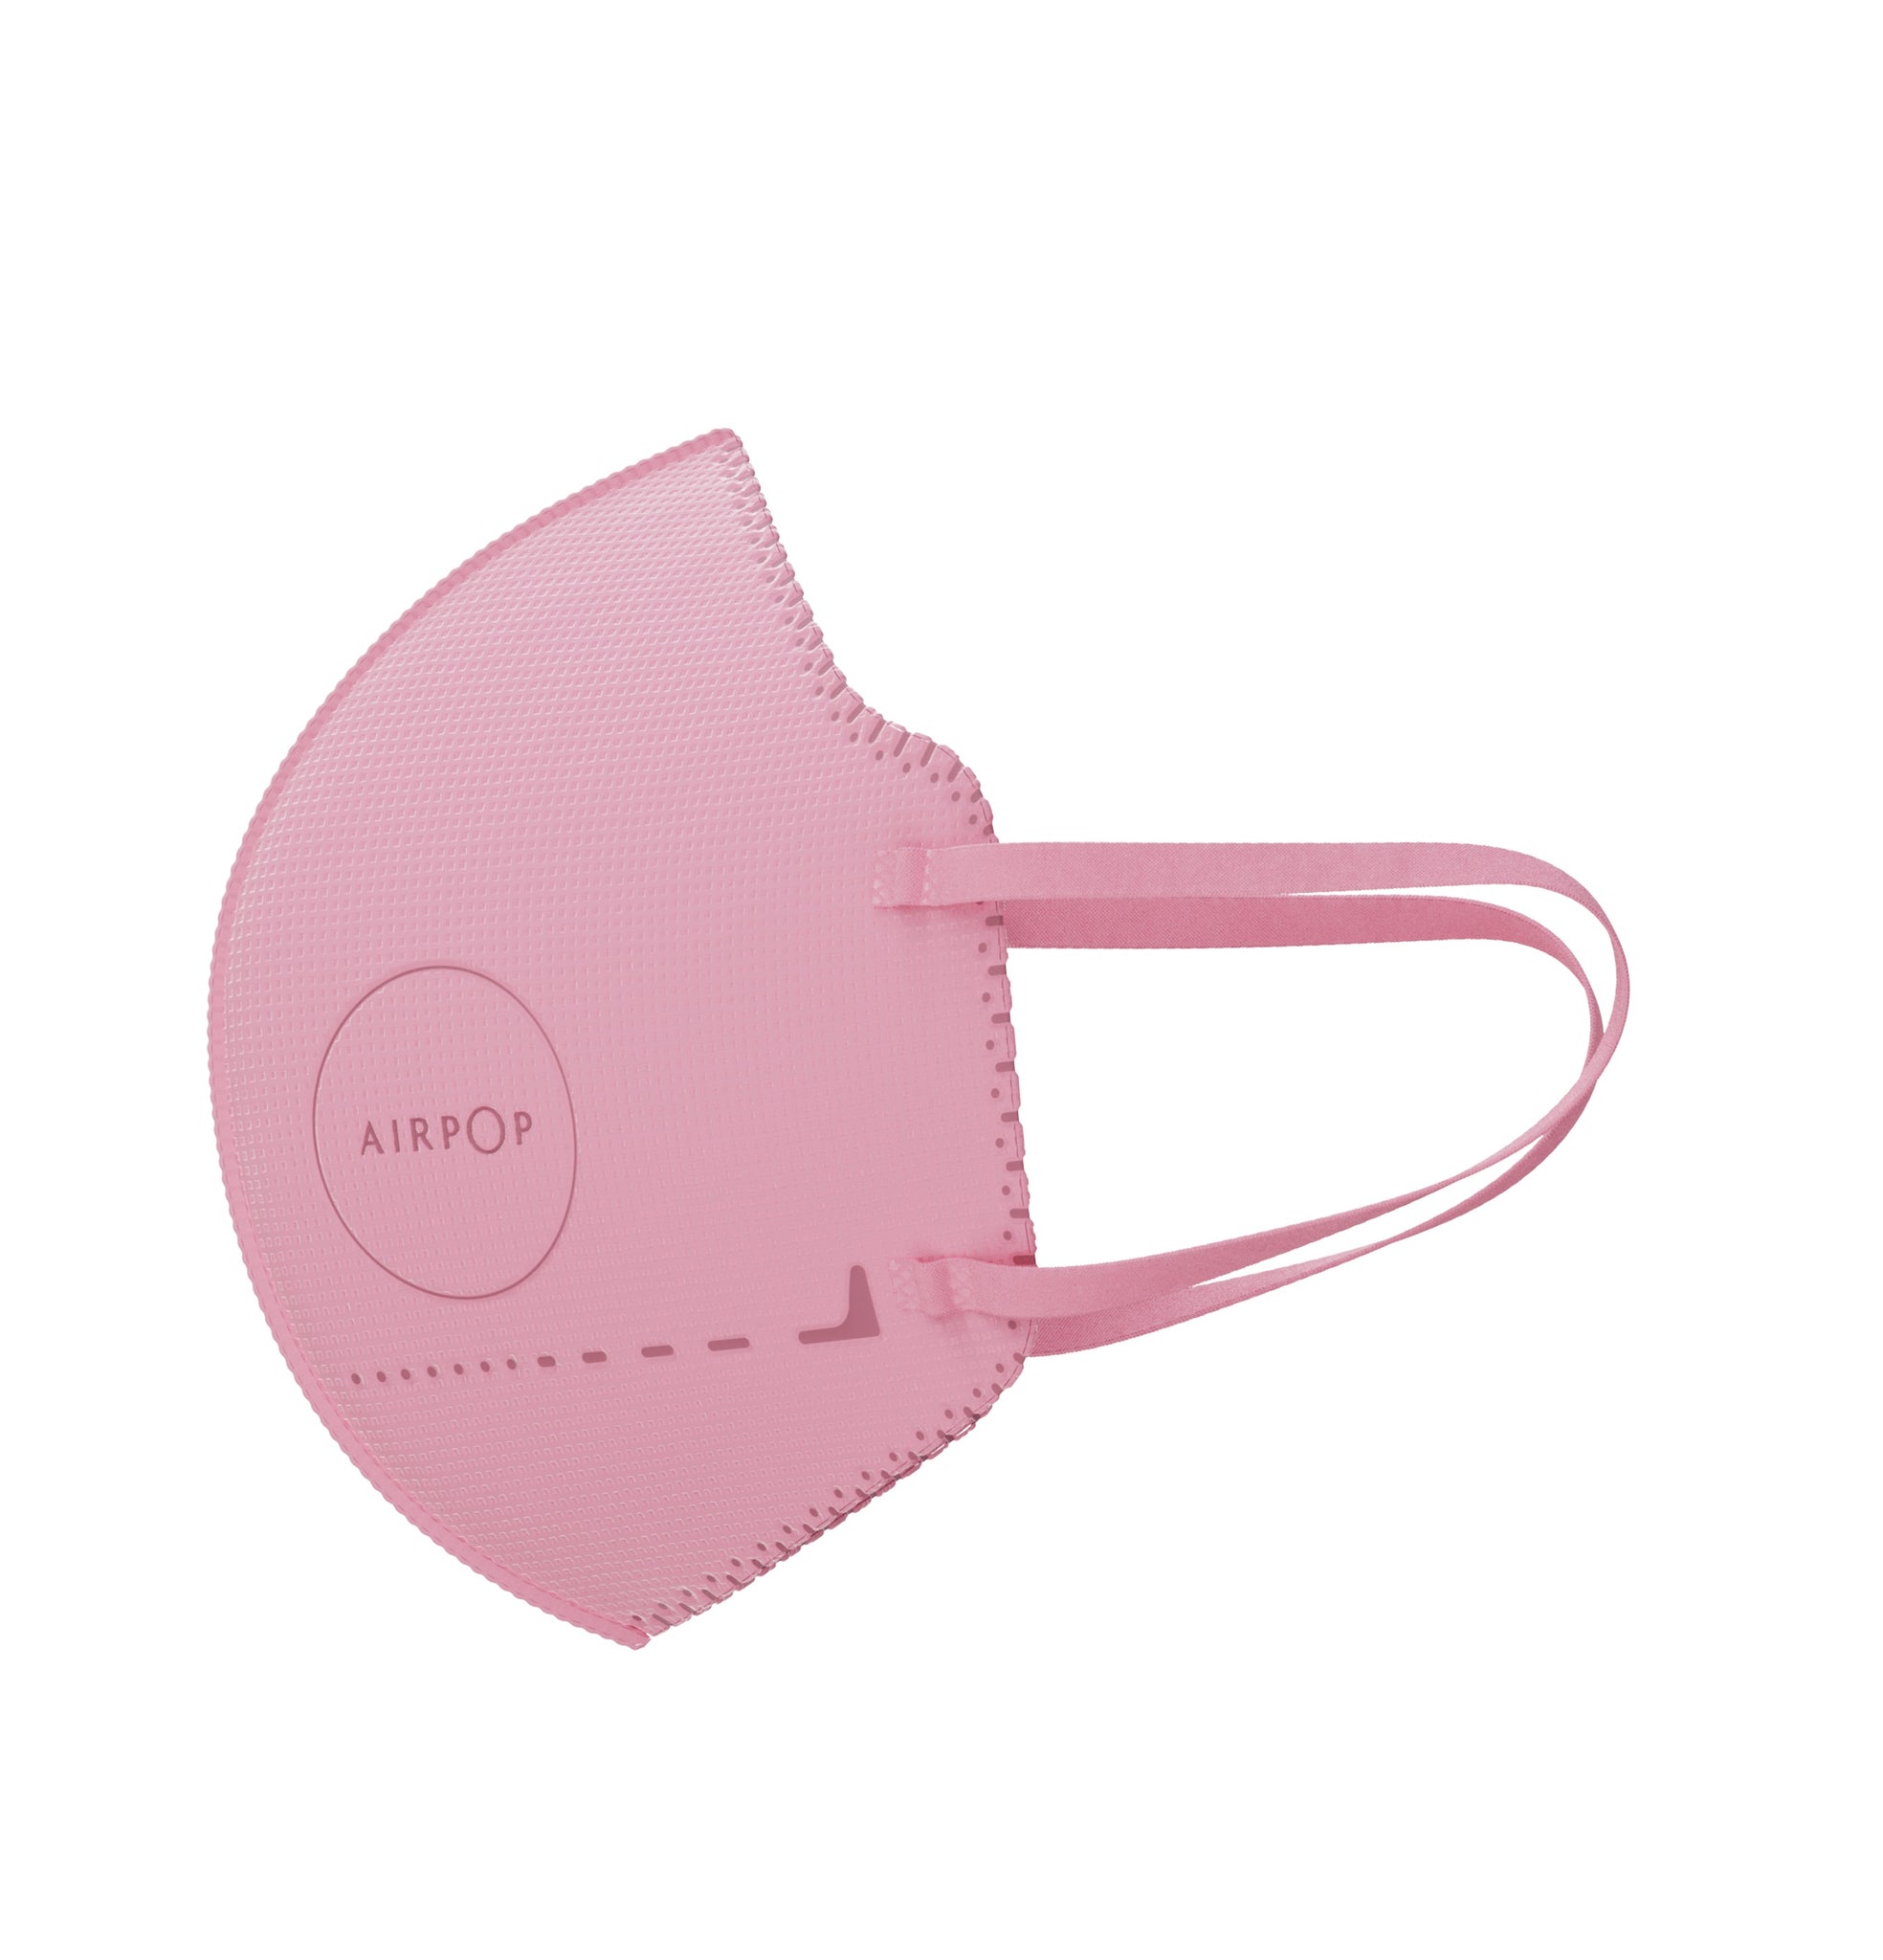 An AirPop Kids Mask, a pink reusable performance mask for kids that is breathable and comfortable, set against a white background.